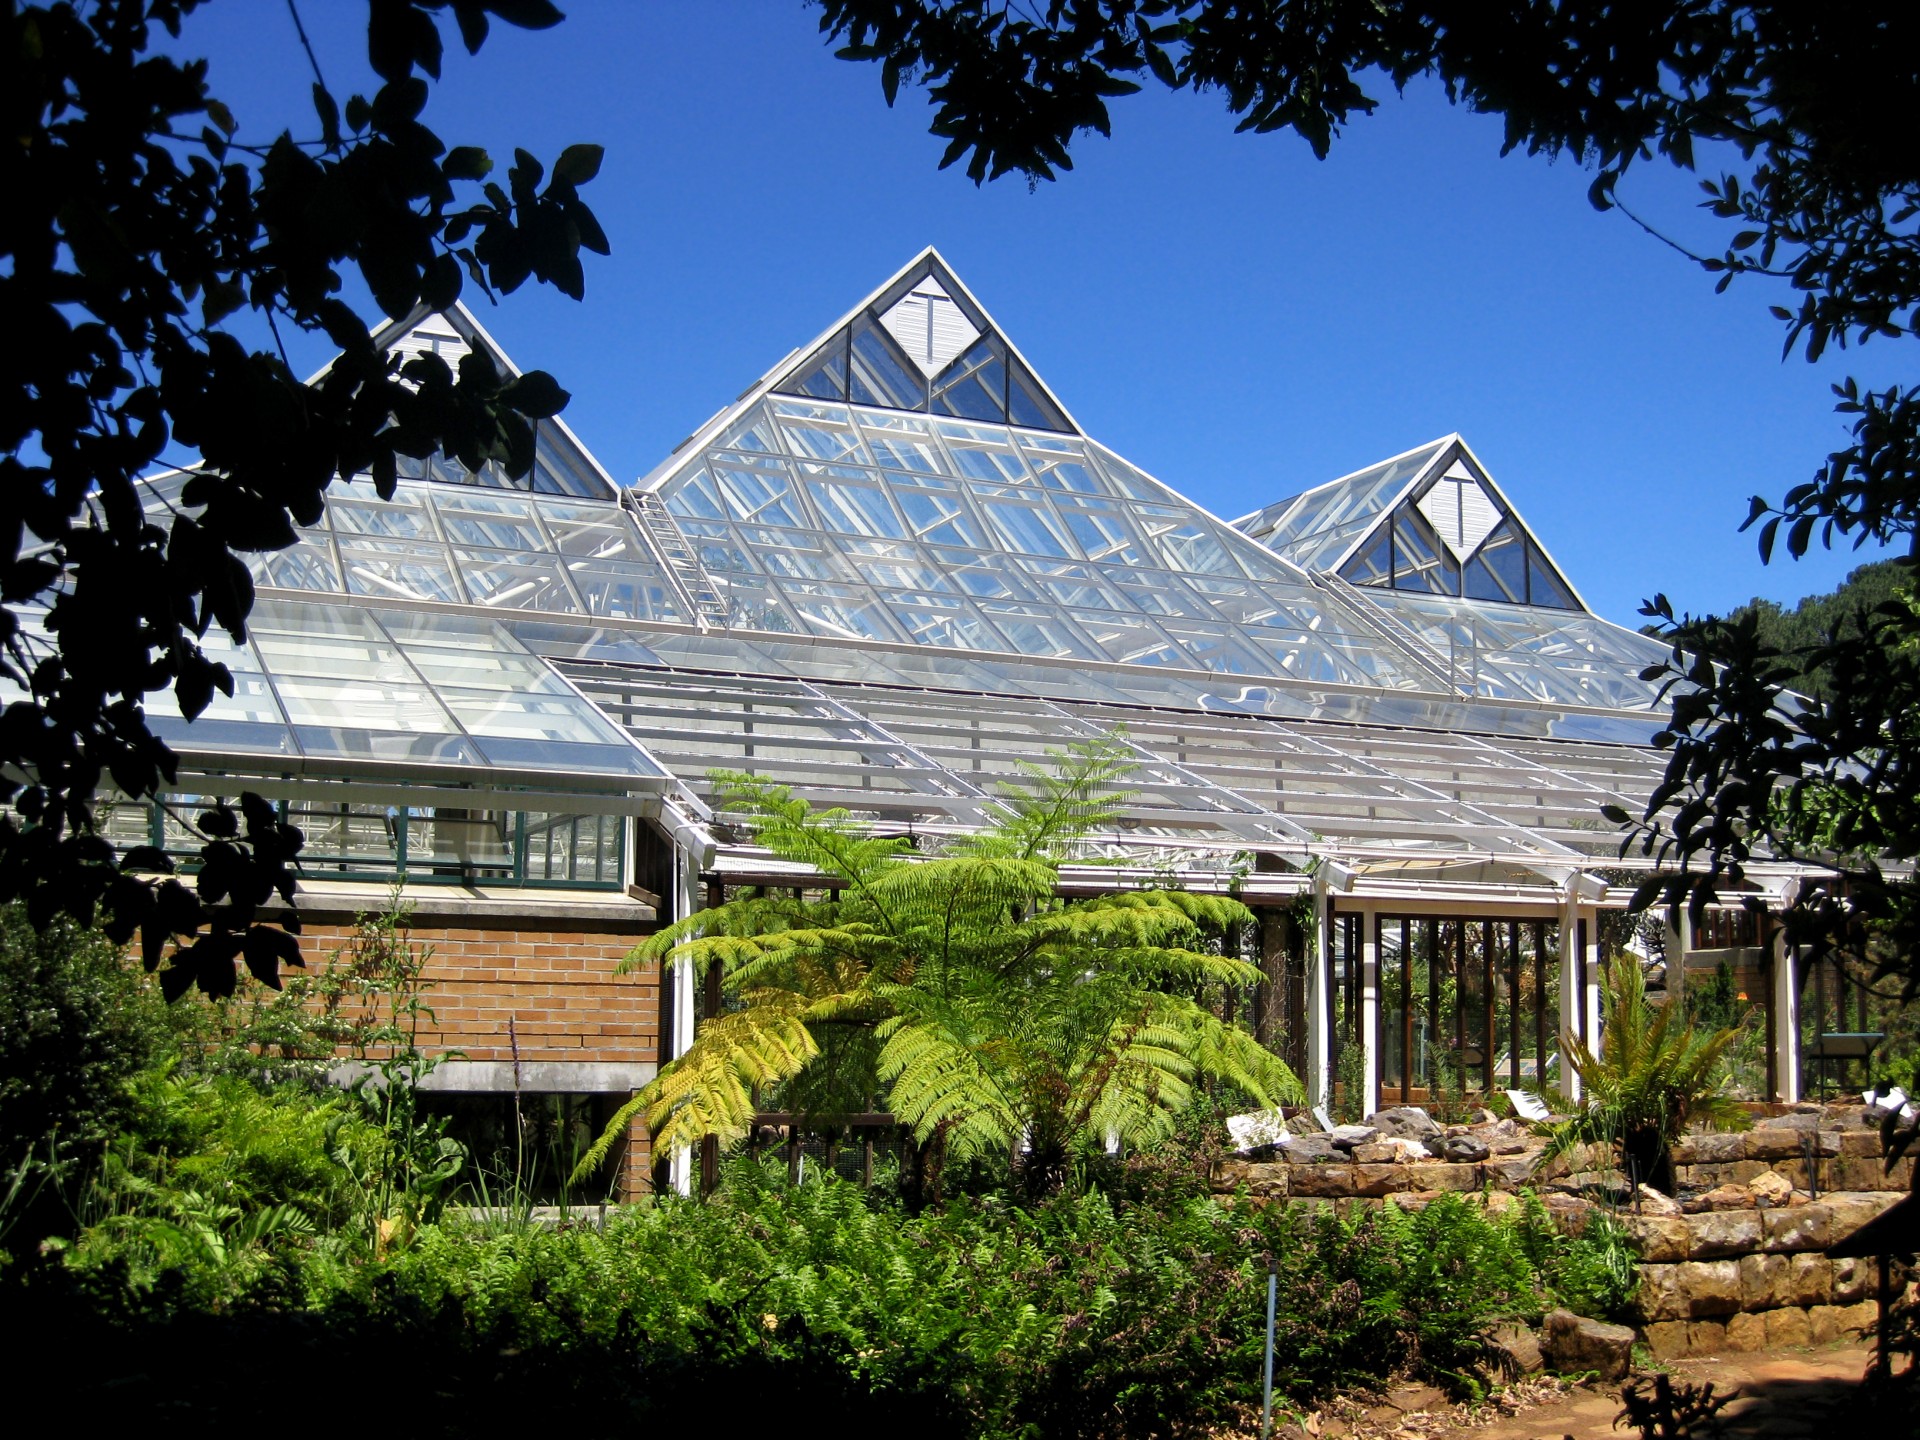 Greenhouse from the outside, Kirstenbosch Botanical Gardens, Cape Town